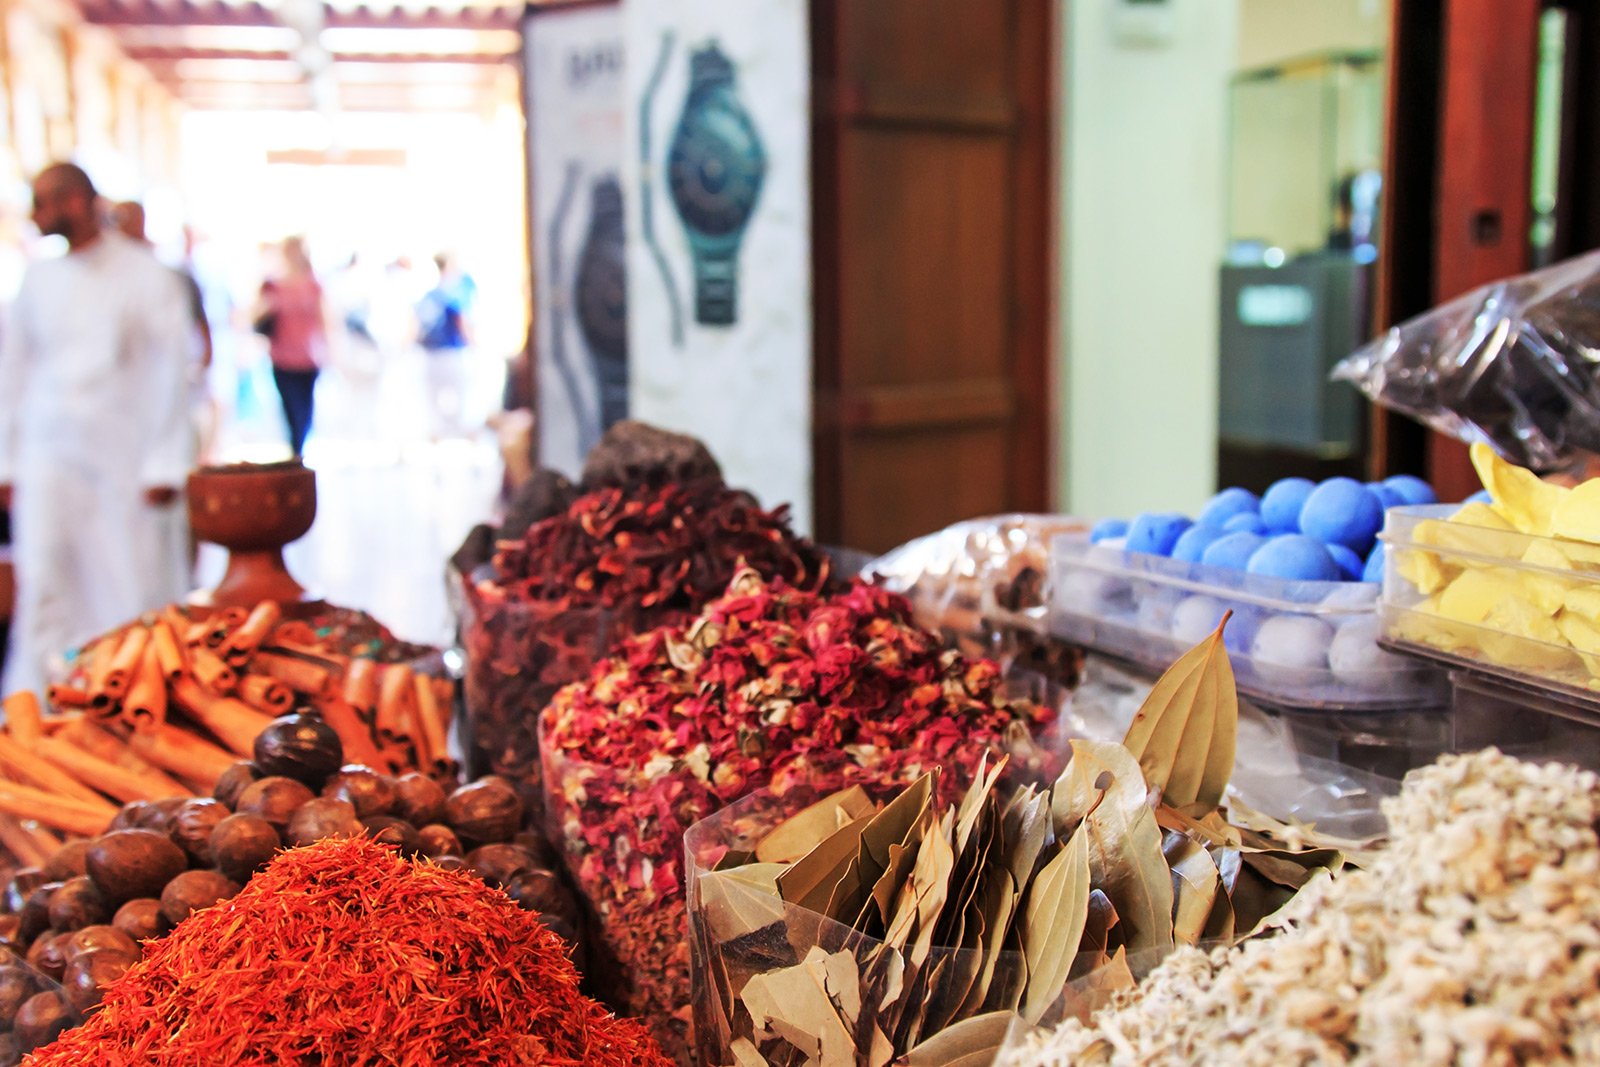 How to visit the Old Market in Dubai